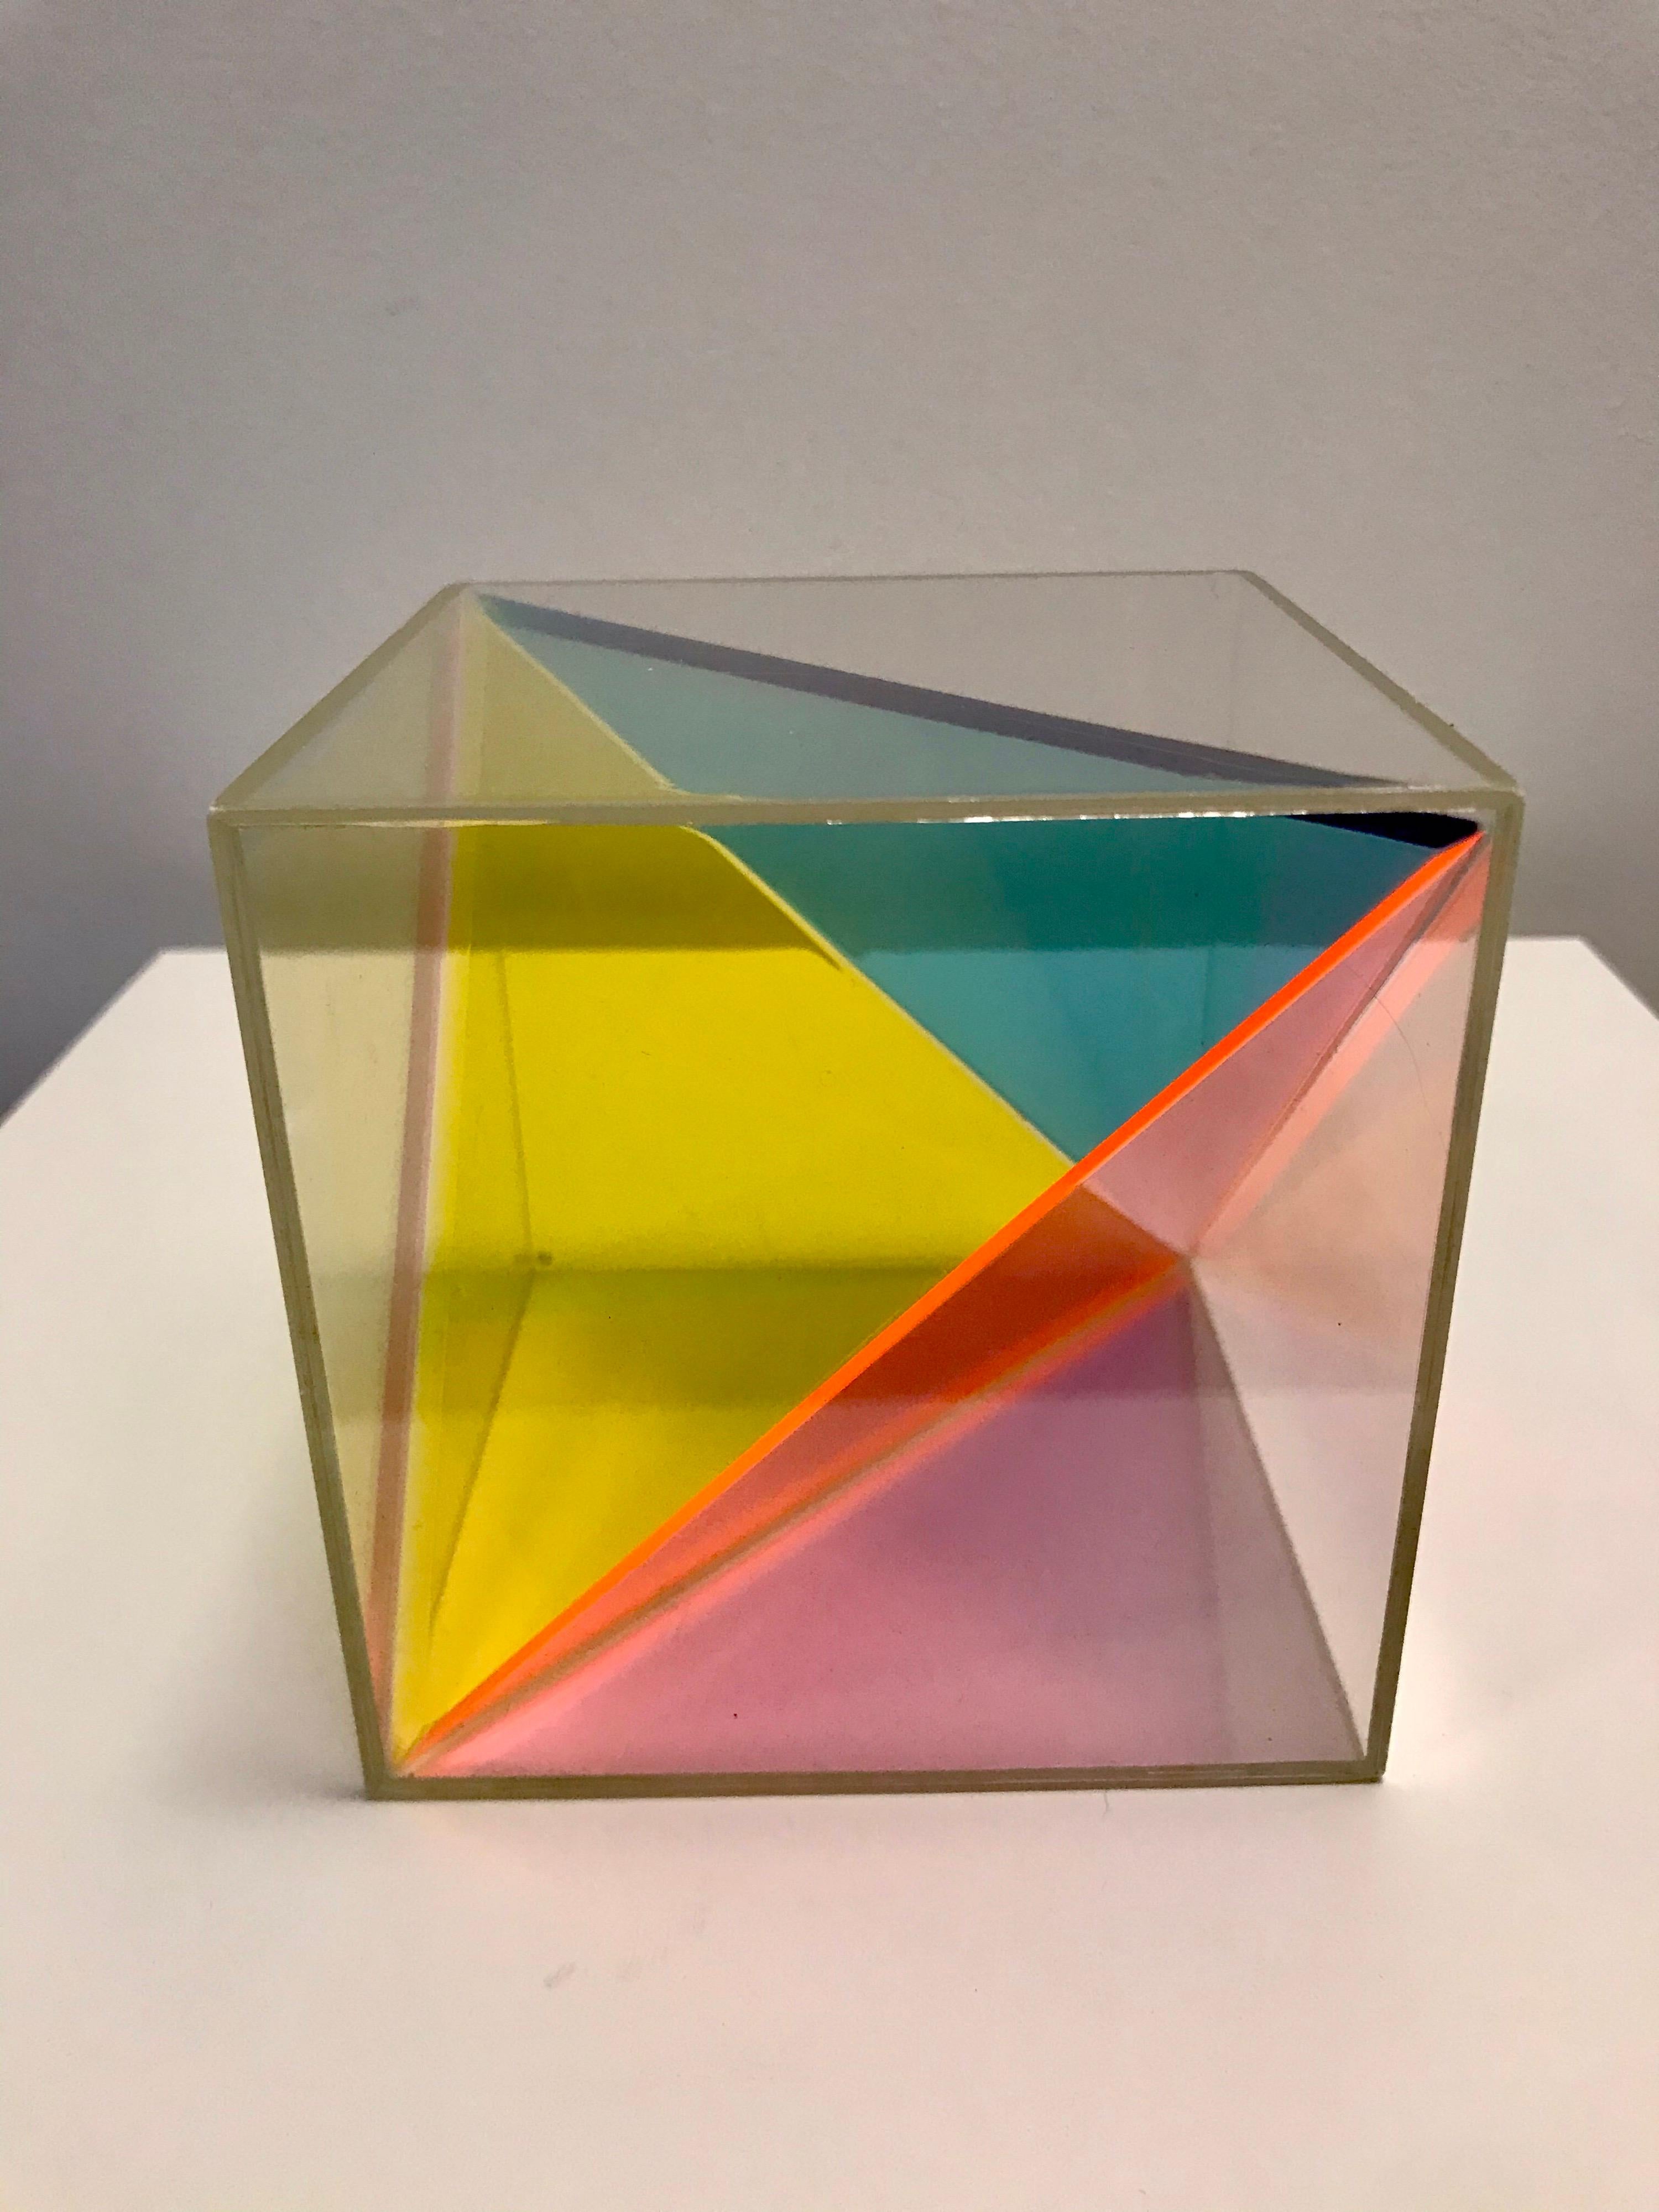 Limited production modernist toy sculpture
geometric and primary colors moved around create secondary colors
display on a credenza or add to a collection.